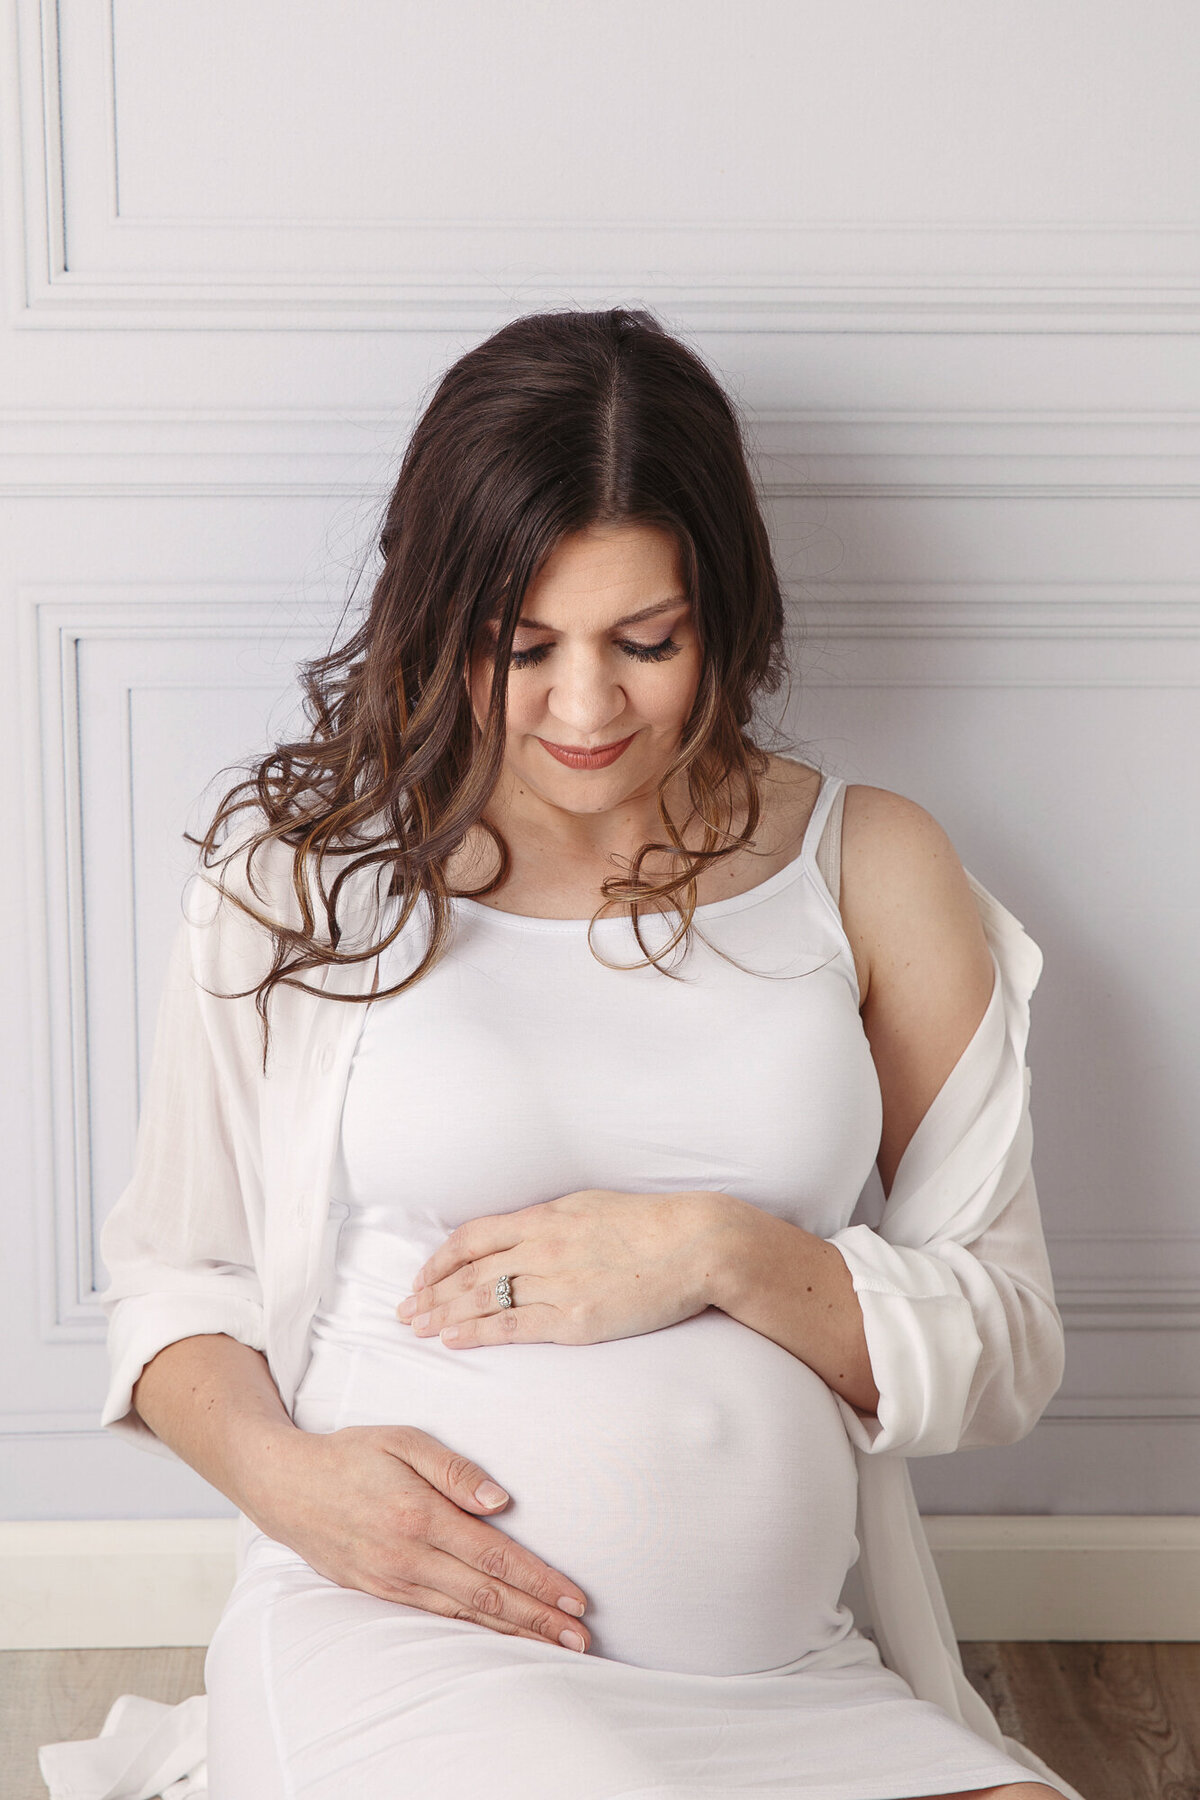 Motherhood portrait of a young pregnant woman sitting against a wall, cradling her belly and looking down at her baby bump